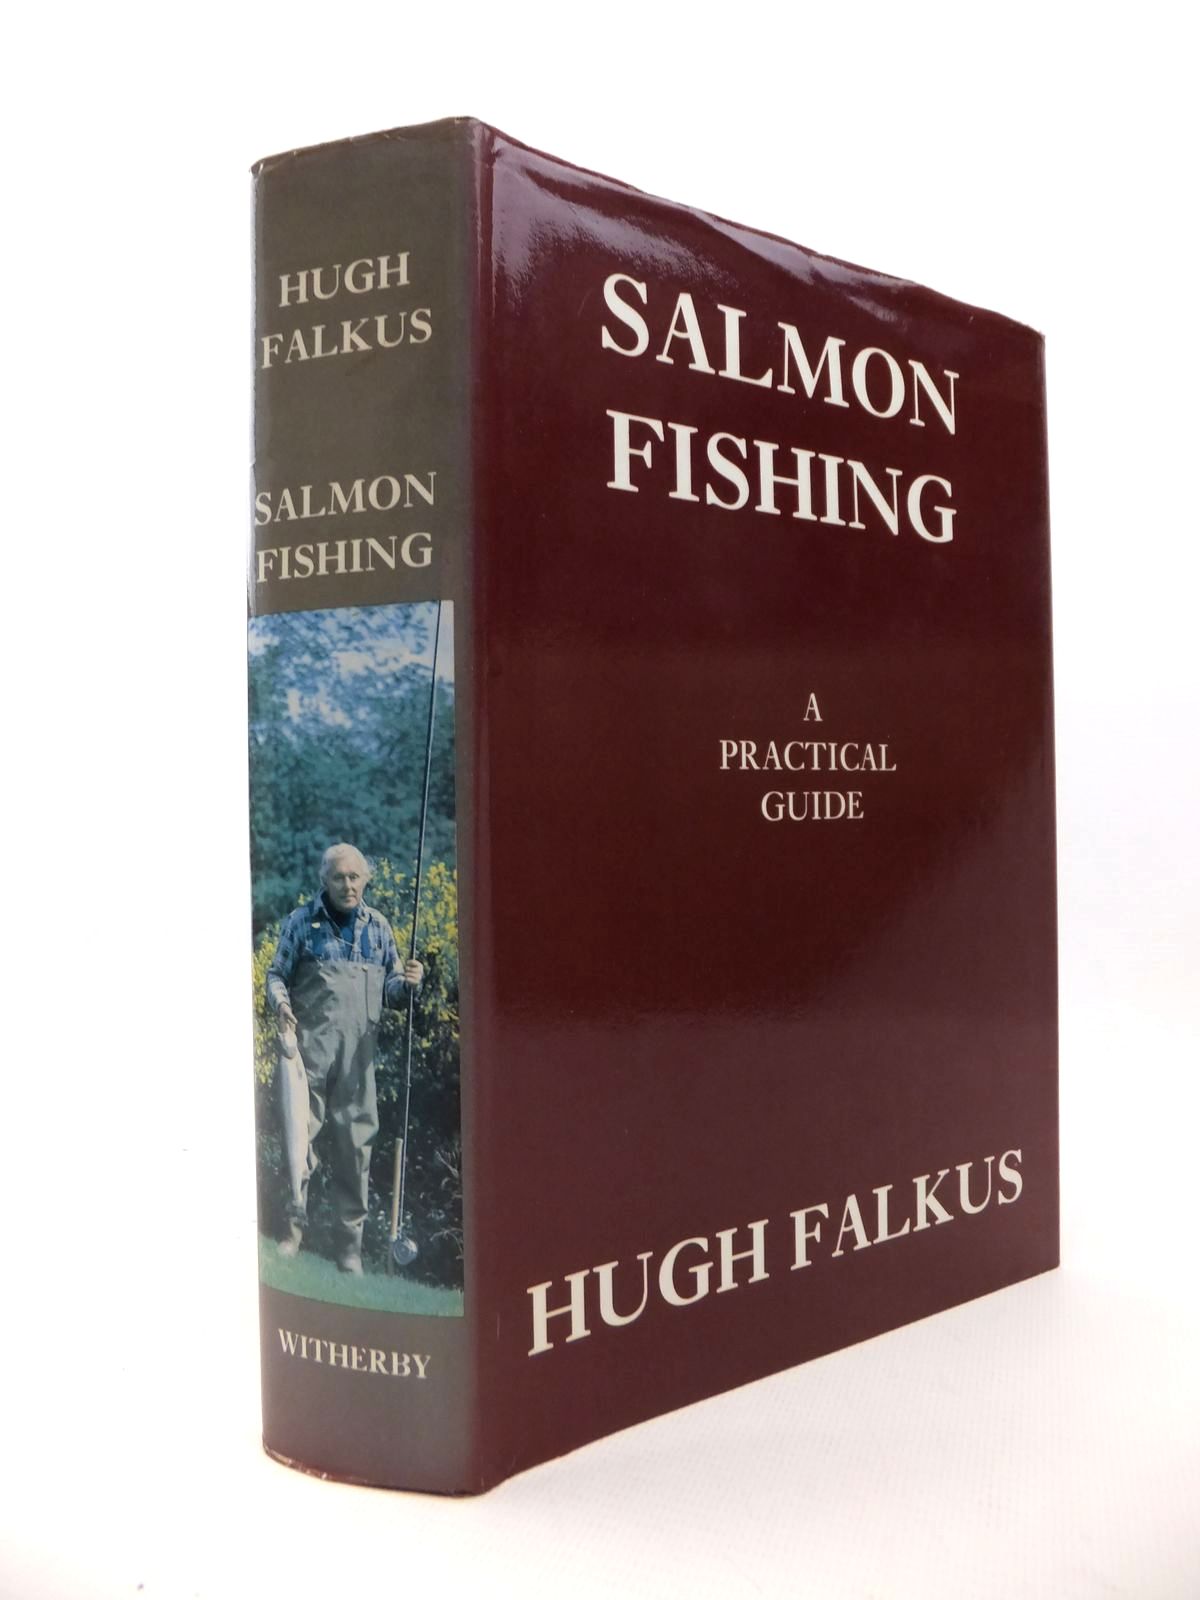 Salmon Fishing: A Practical Guide [Book]